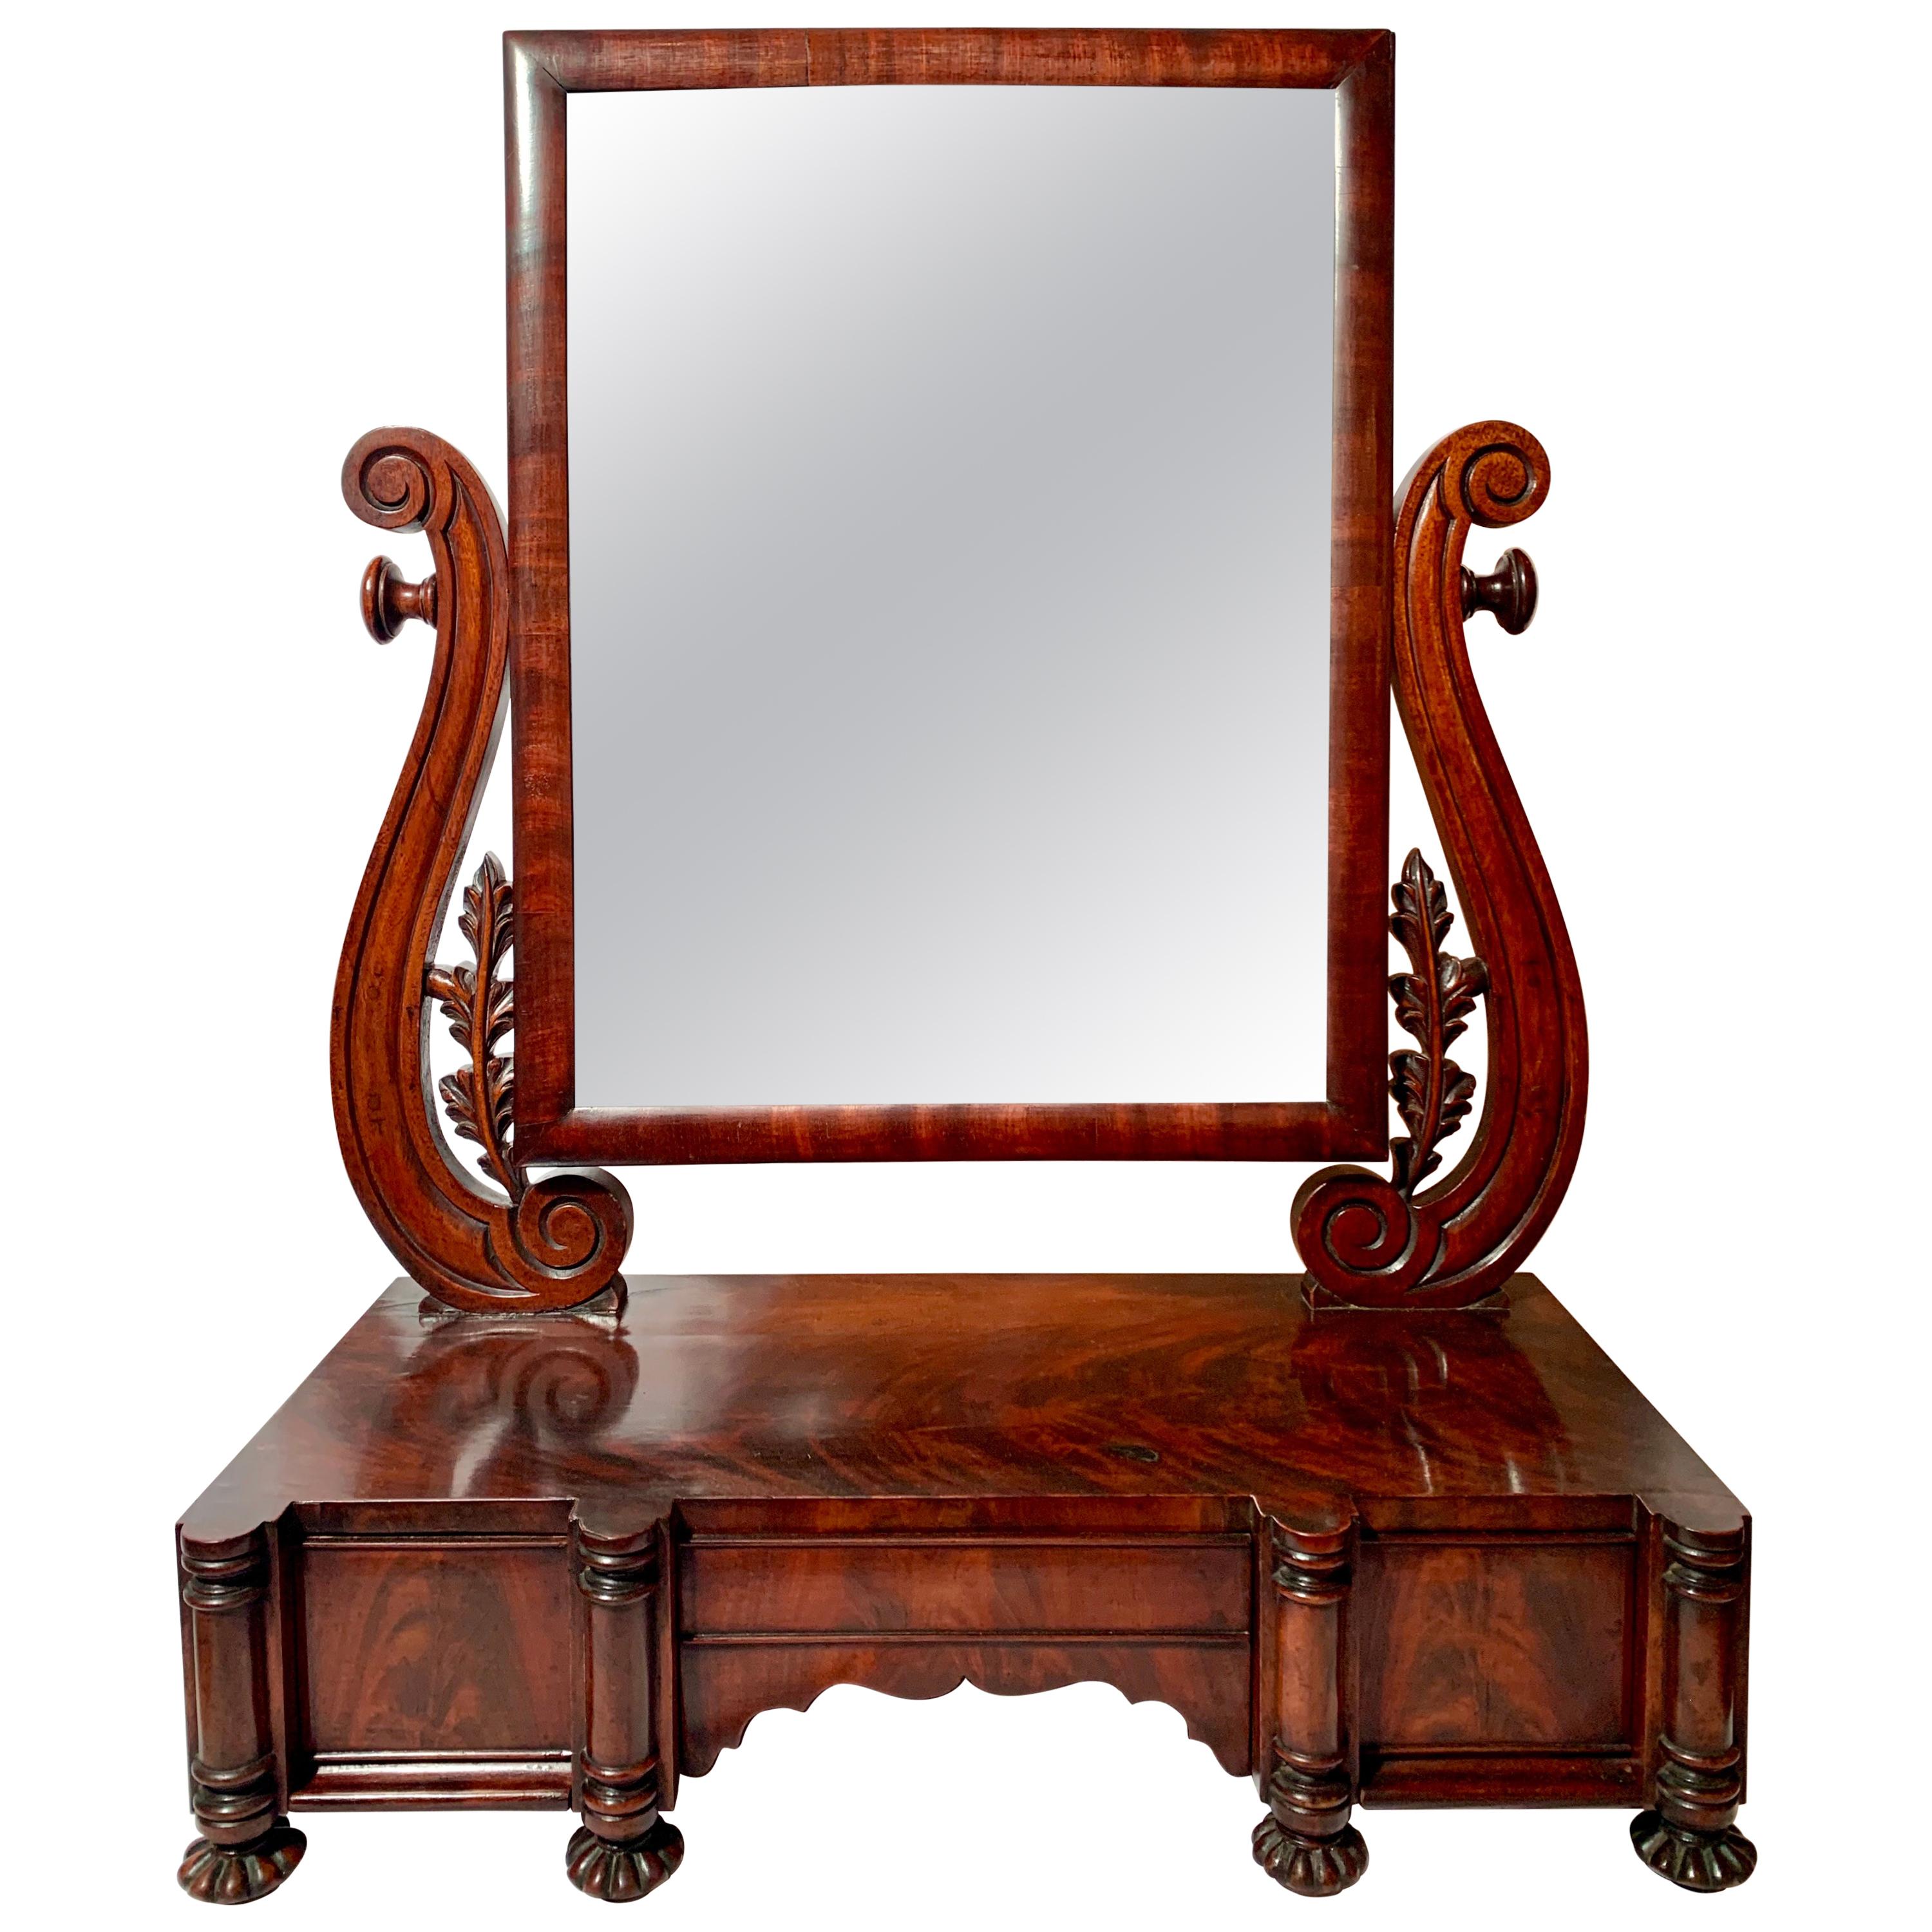 Antique Early 19th Century American Federal Dressing Mirror For Sale